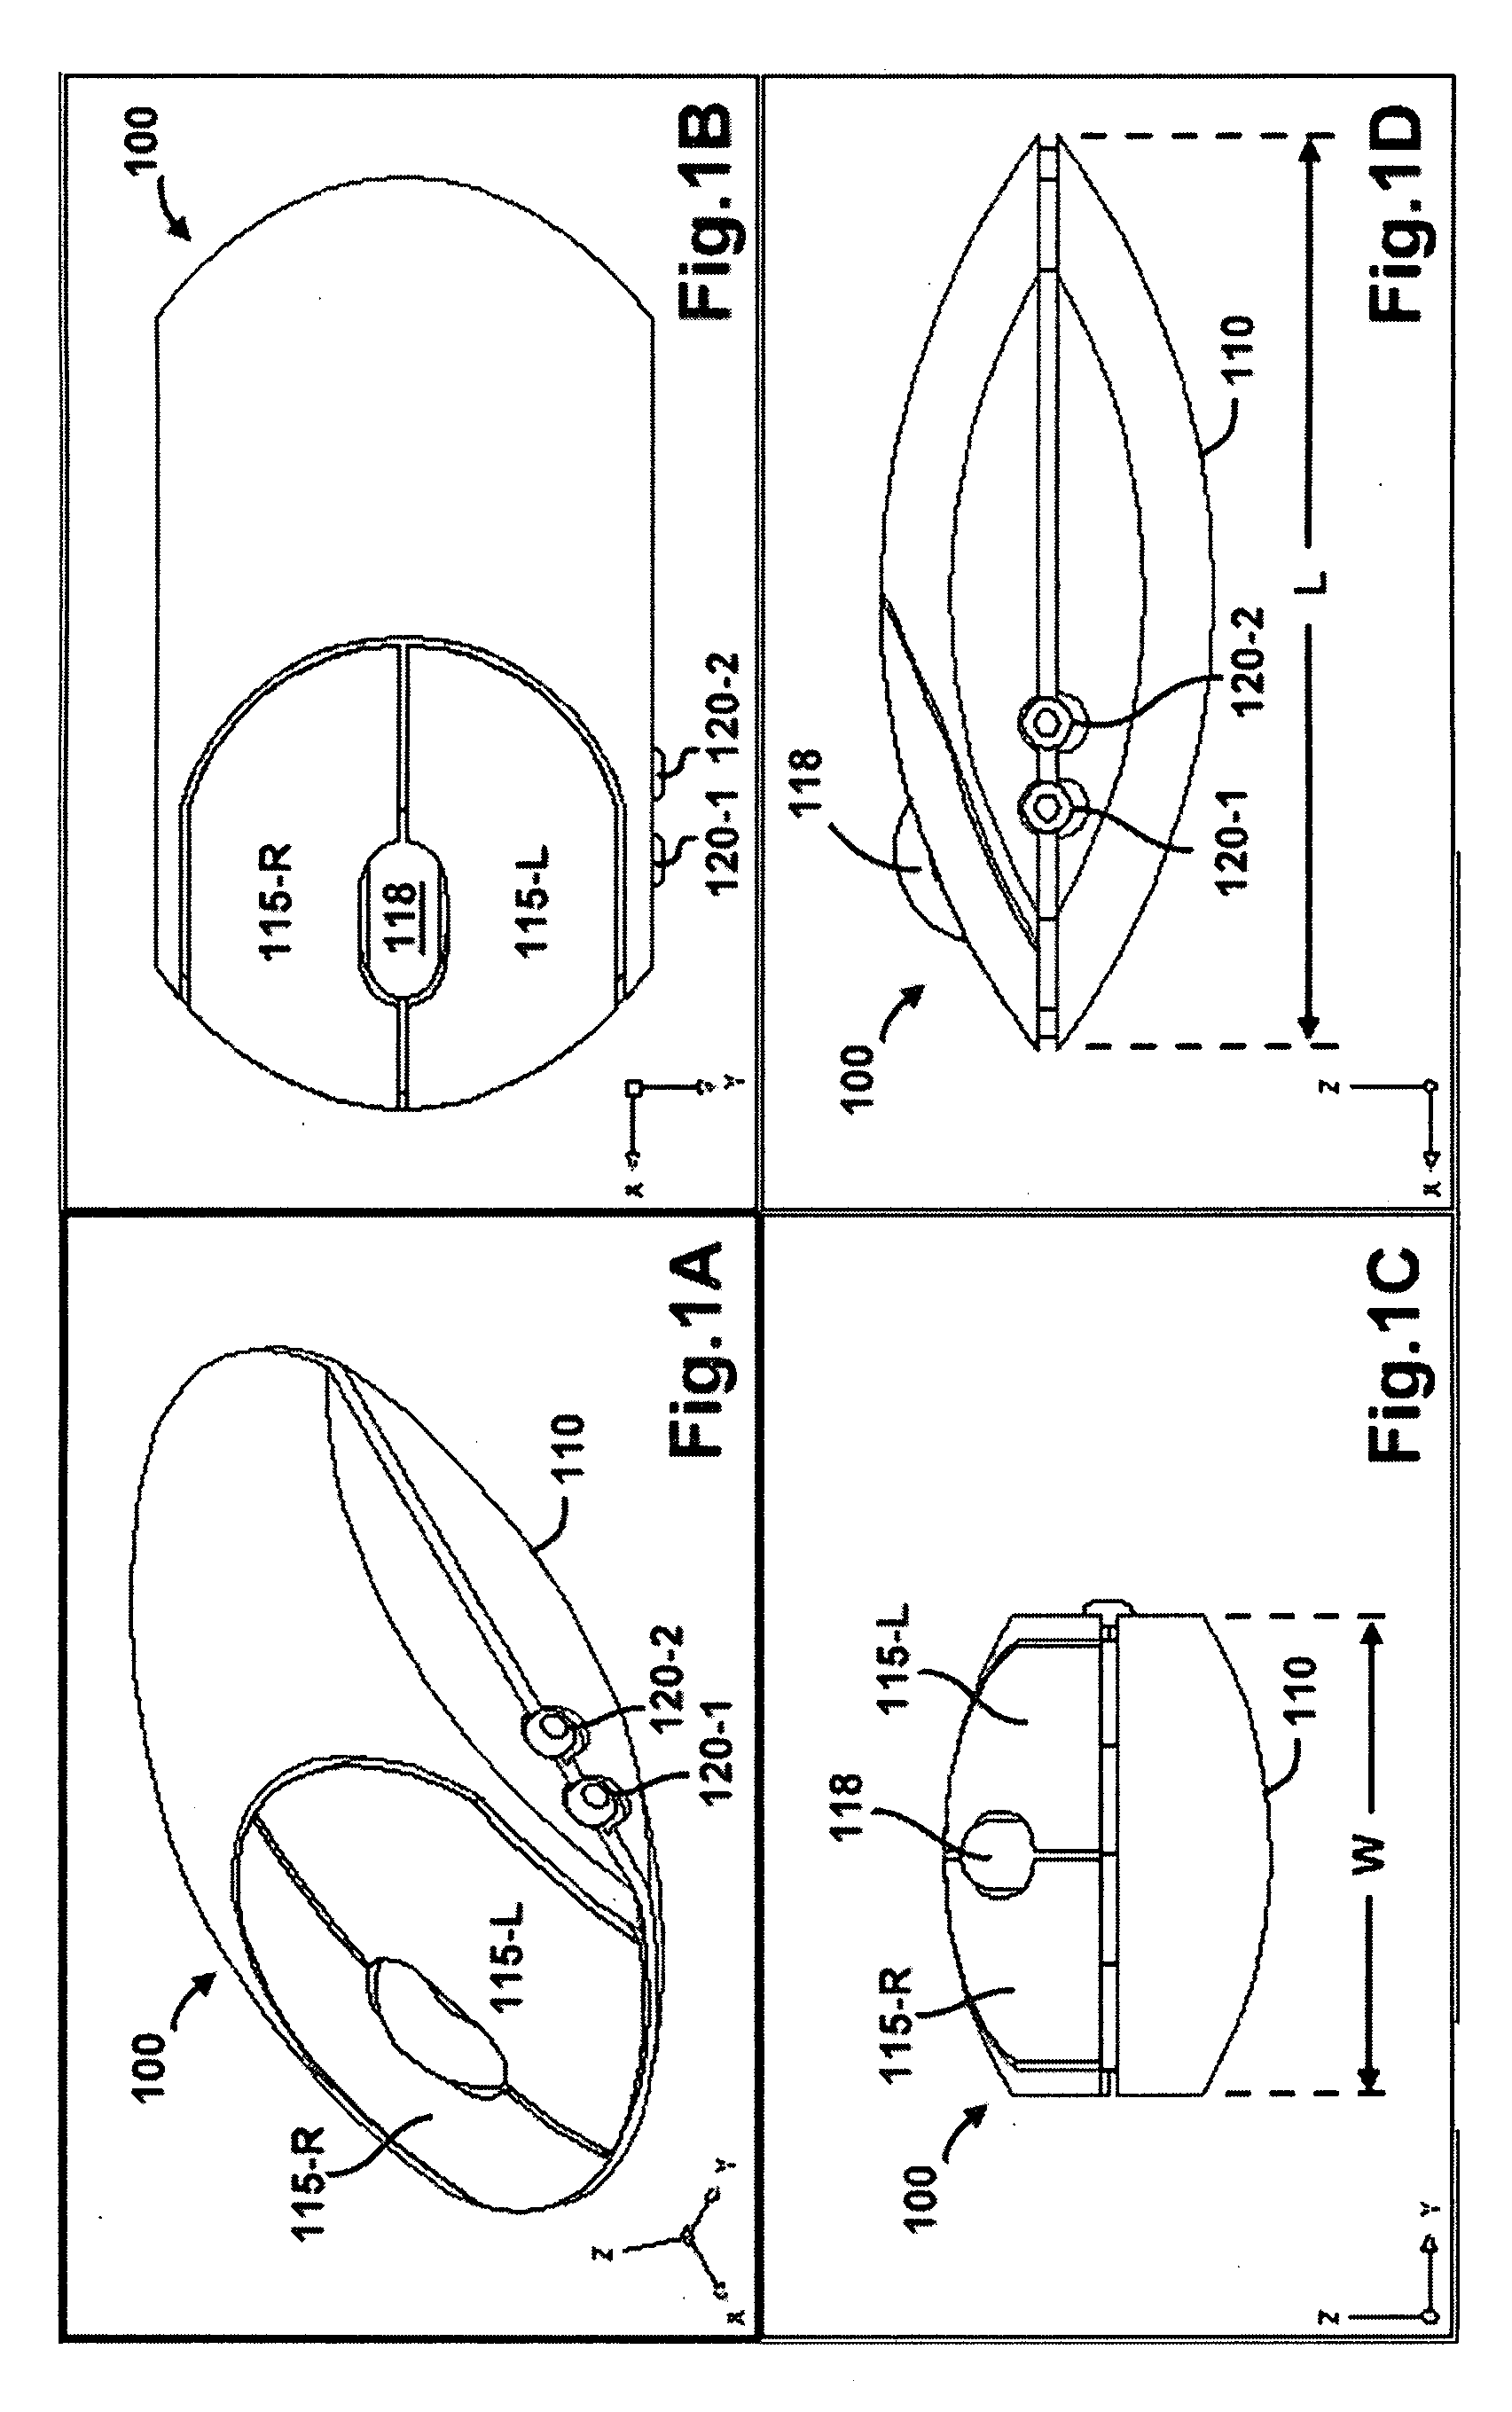 Display cursor control device with enhanced multiple dimensional tilt angle operation